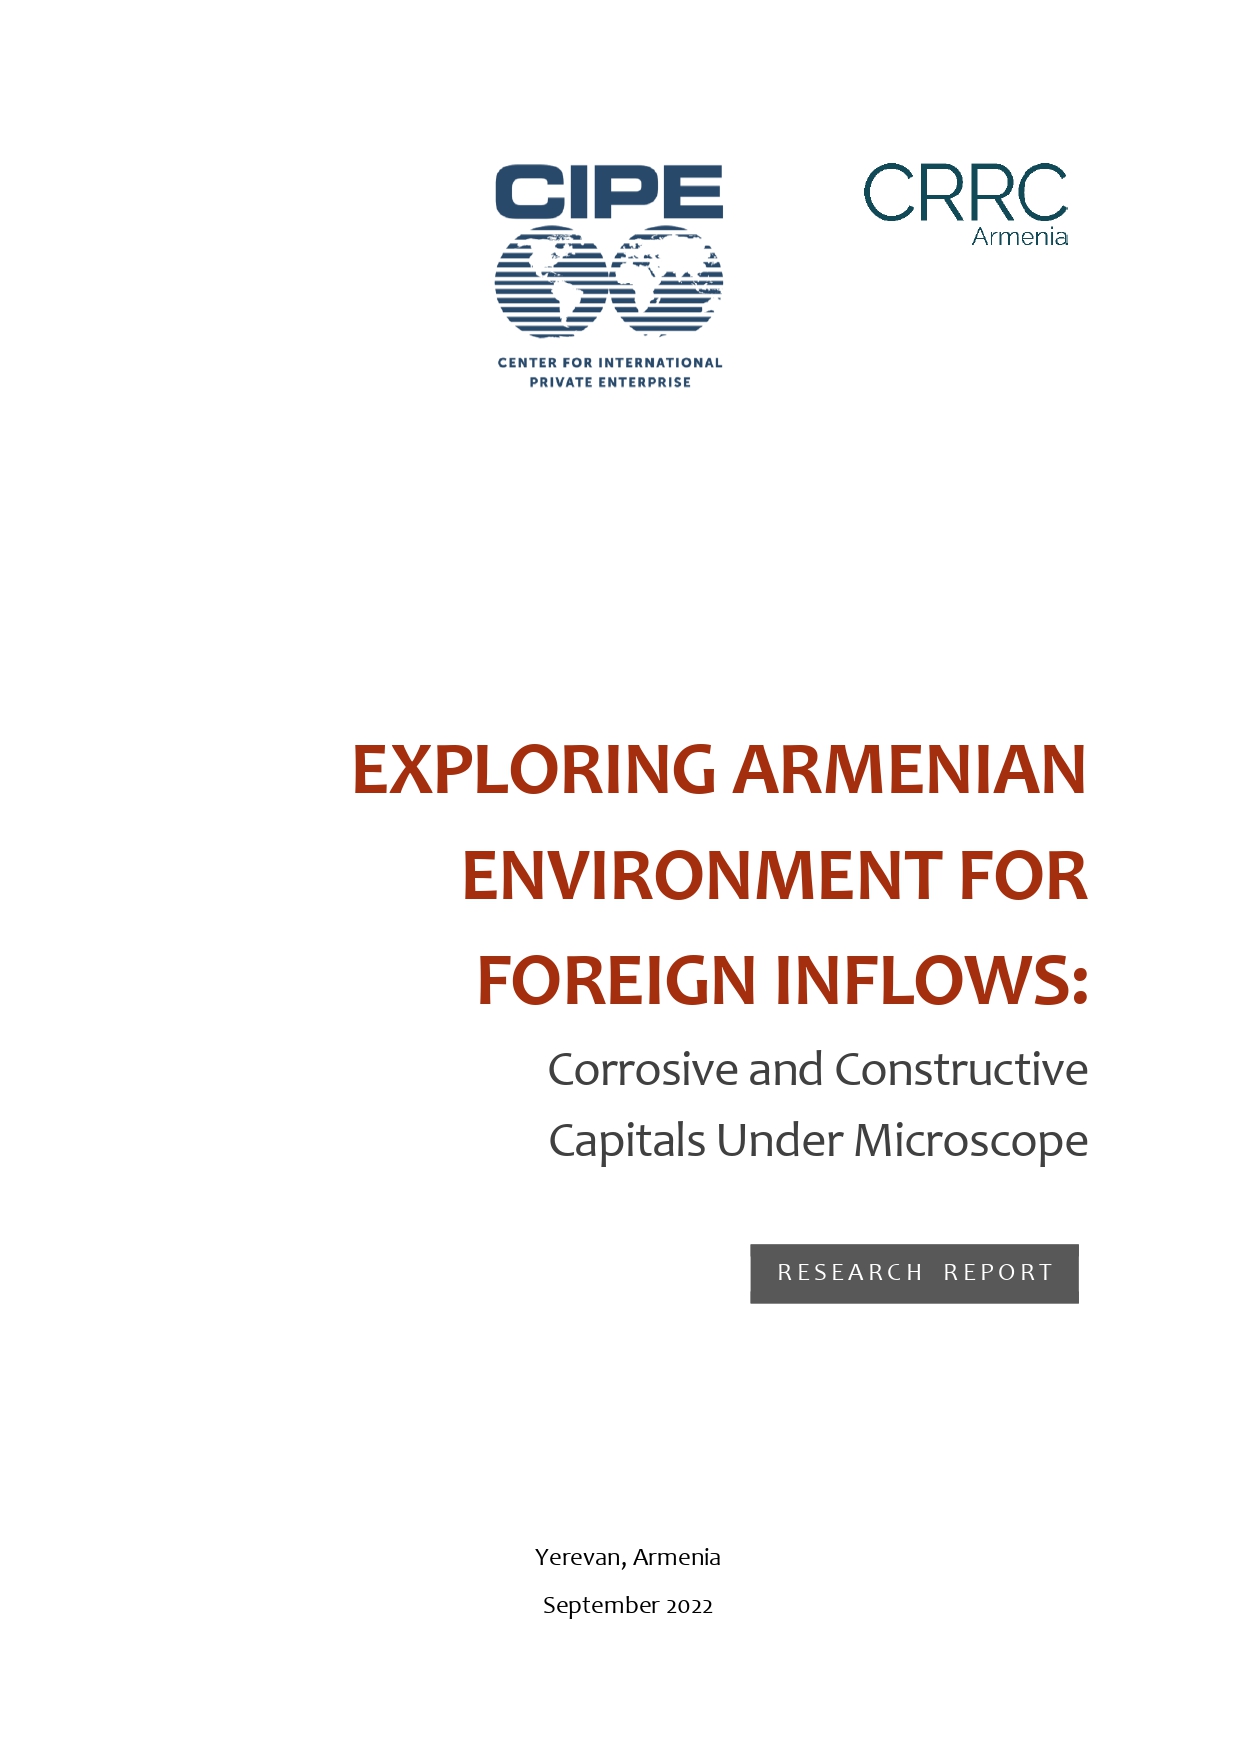 Exploring Armenian Environment for Foreign Inflows: Corrosive and Constructive Capitals under Microscope